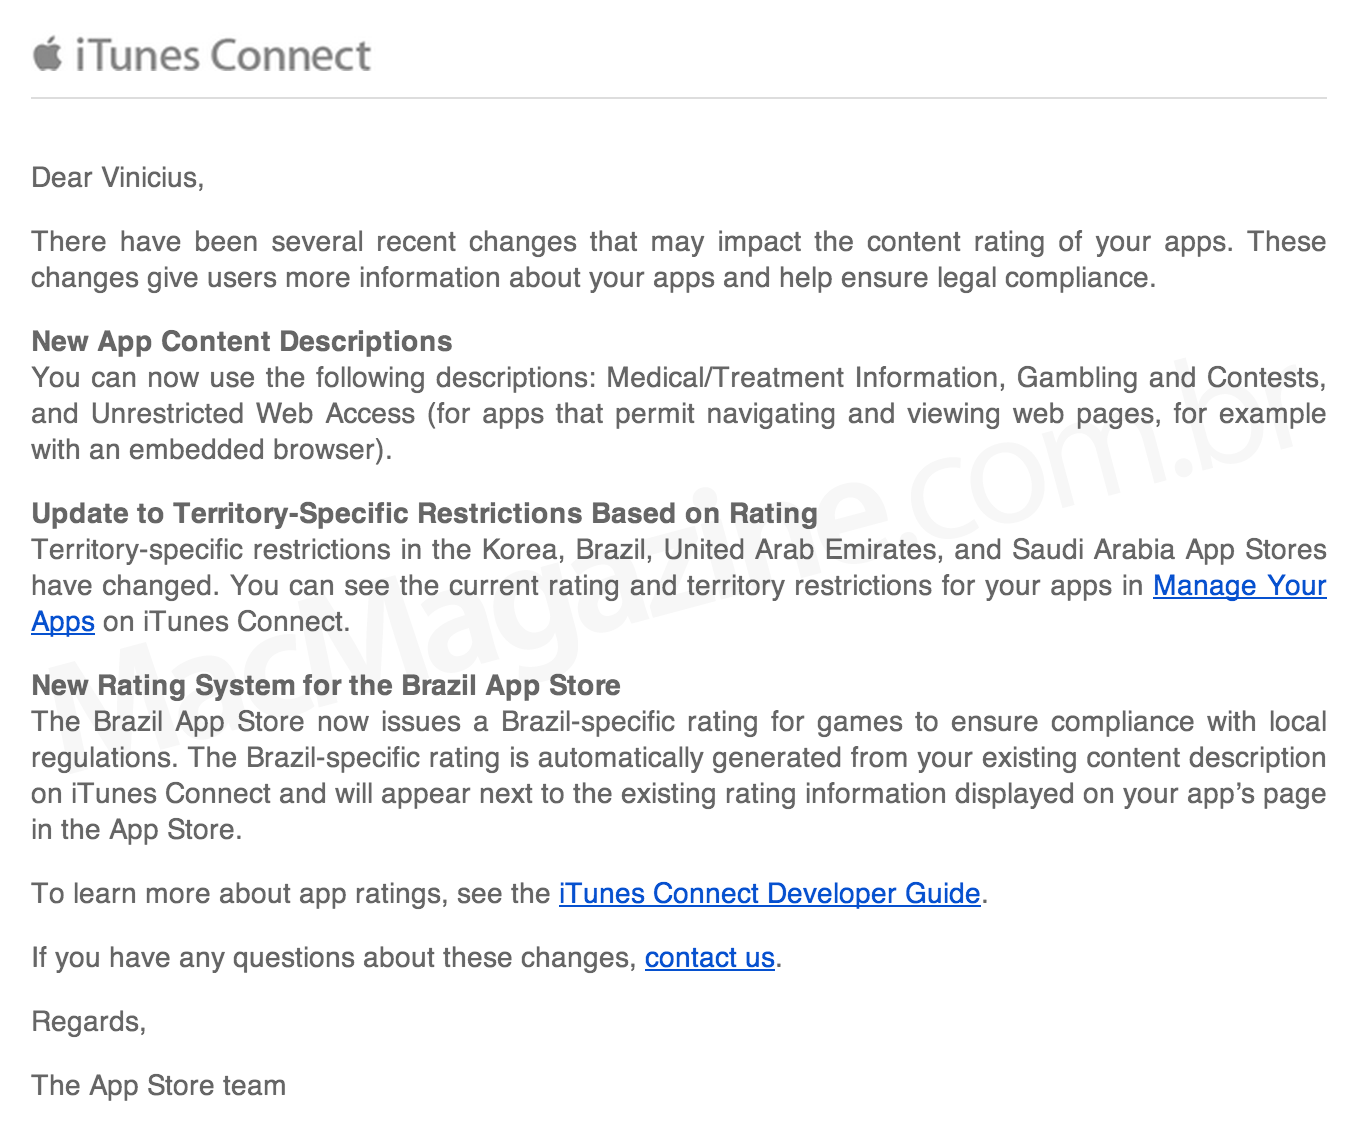 Email do iTunes Connect